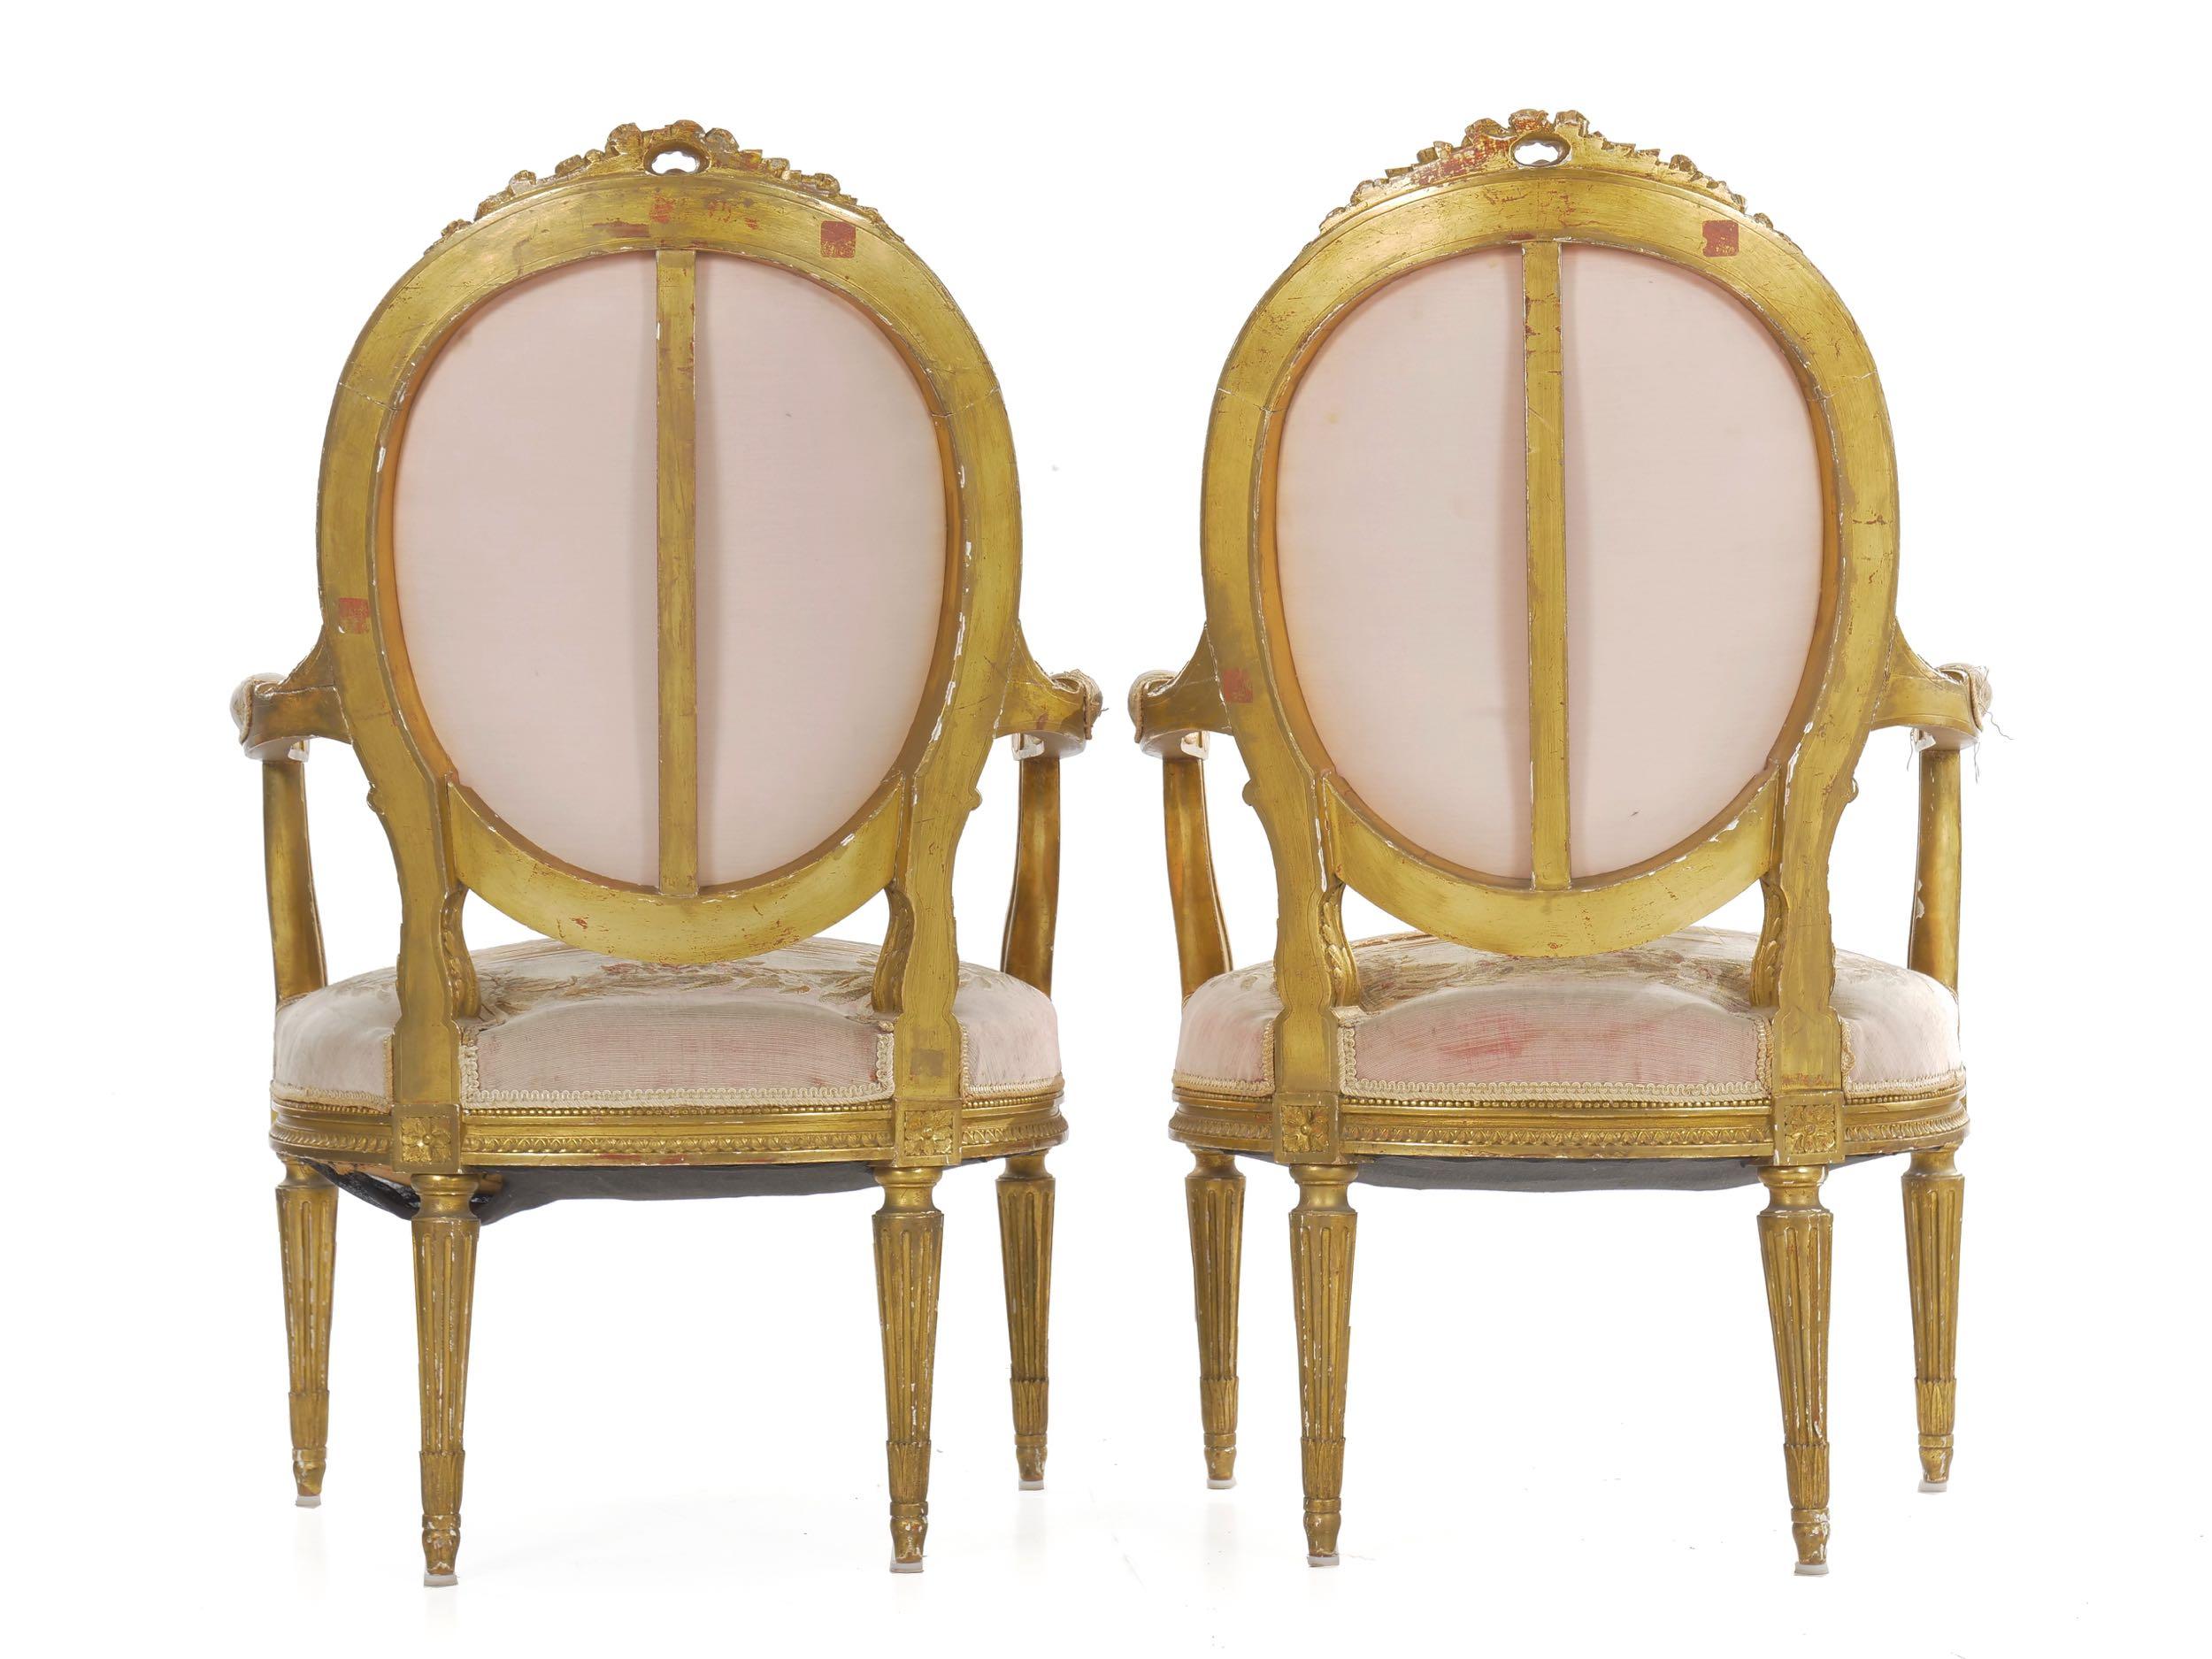 Carved Pair of French Louis XVI Style Giltwood Antique Armchairs Fauteuils